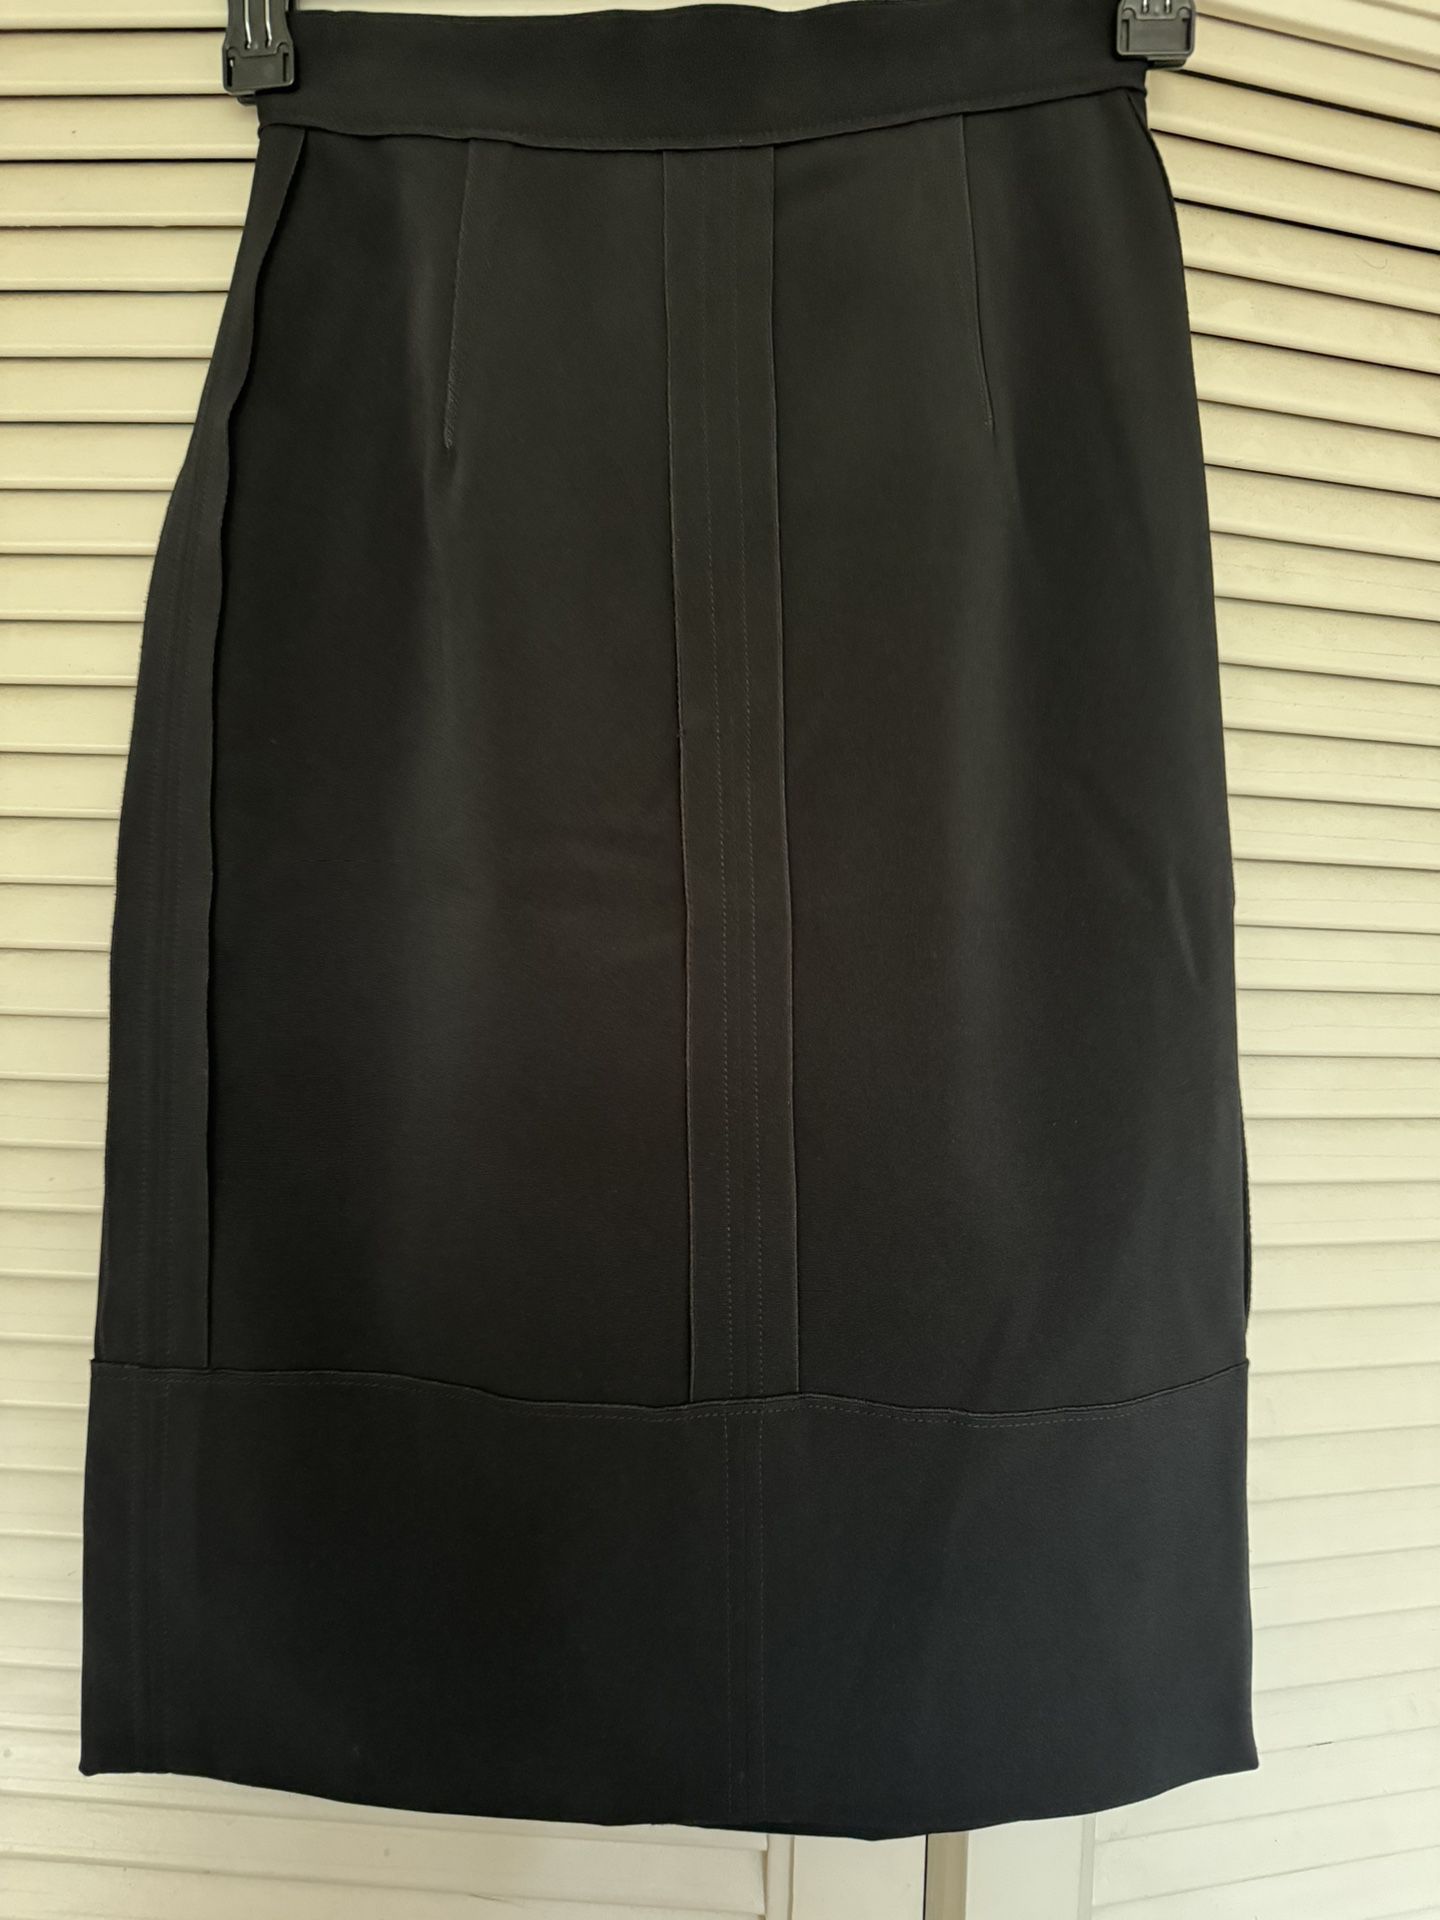 Authentic Dolce And Gabbana Pencil Skirt Size 38